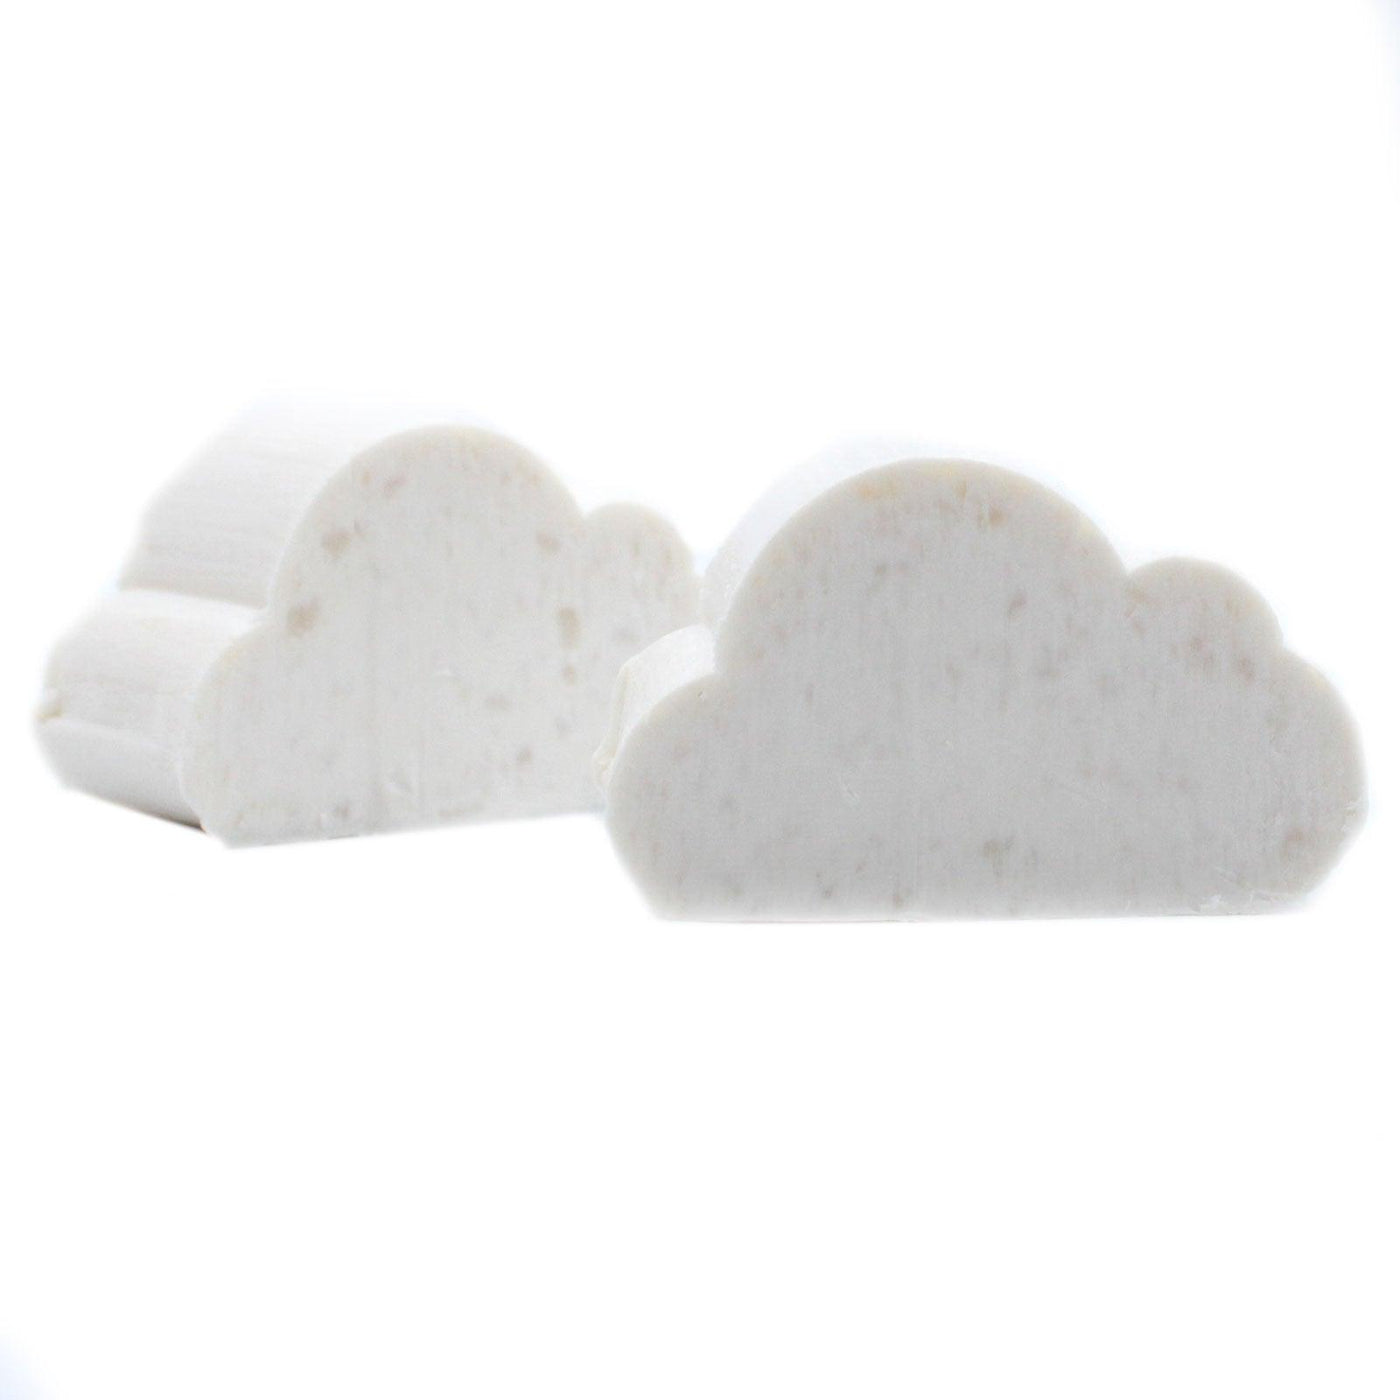 10x White Cloud Shaped Paraben Free Fragranced Guest Soaps - Angel Hallo.